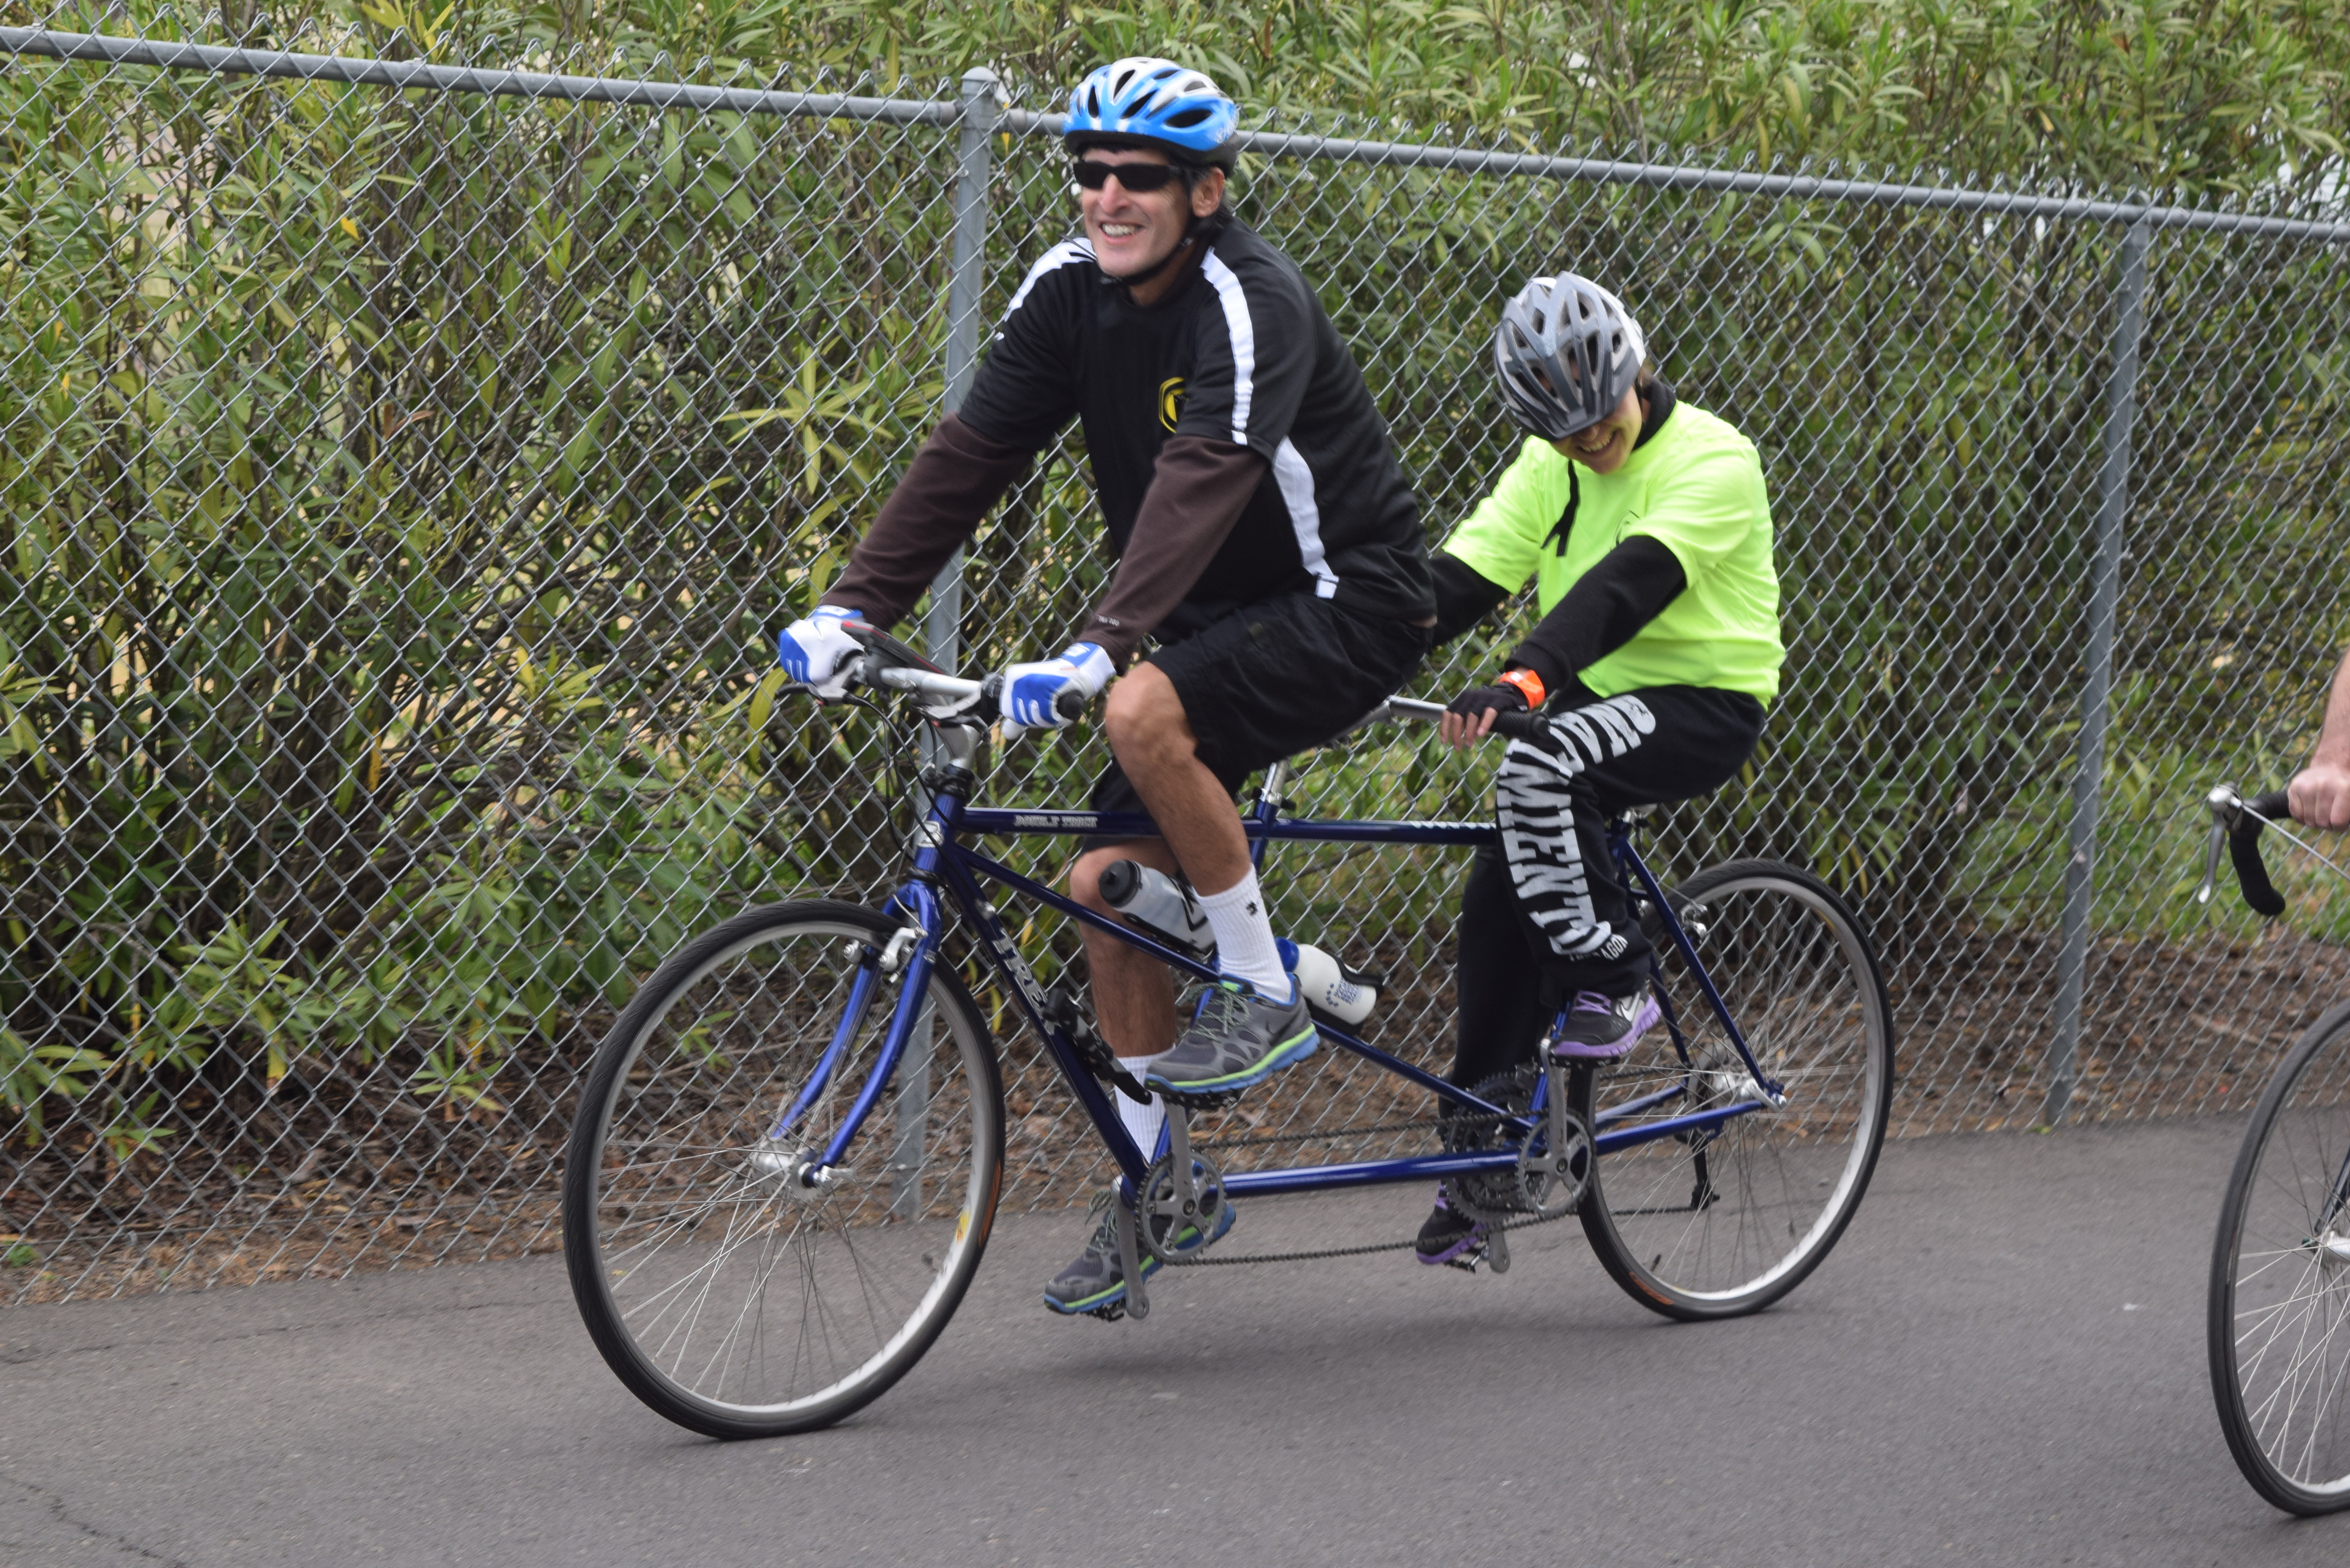 Cycle for Sight riders on a tandem bicycle